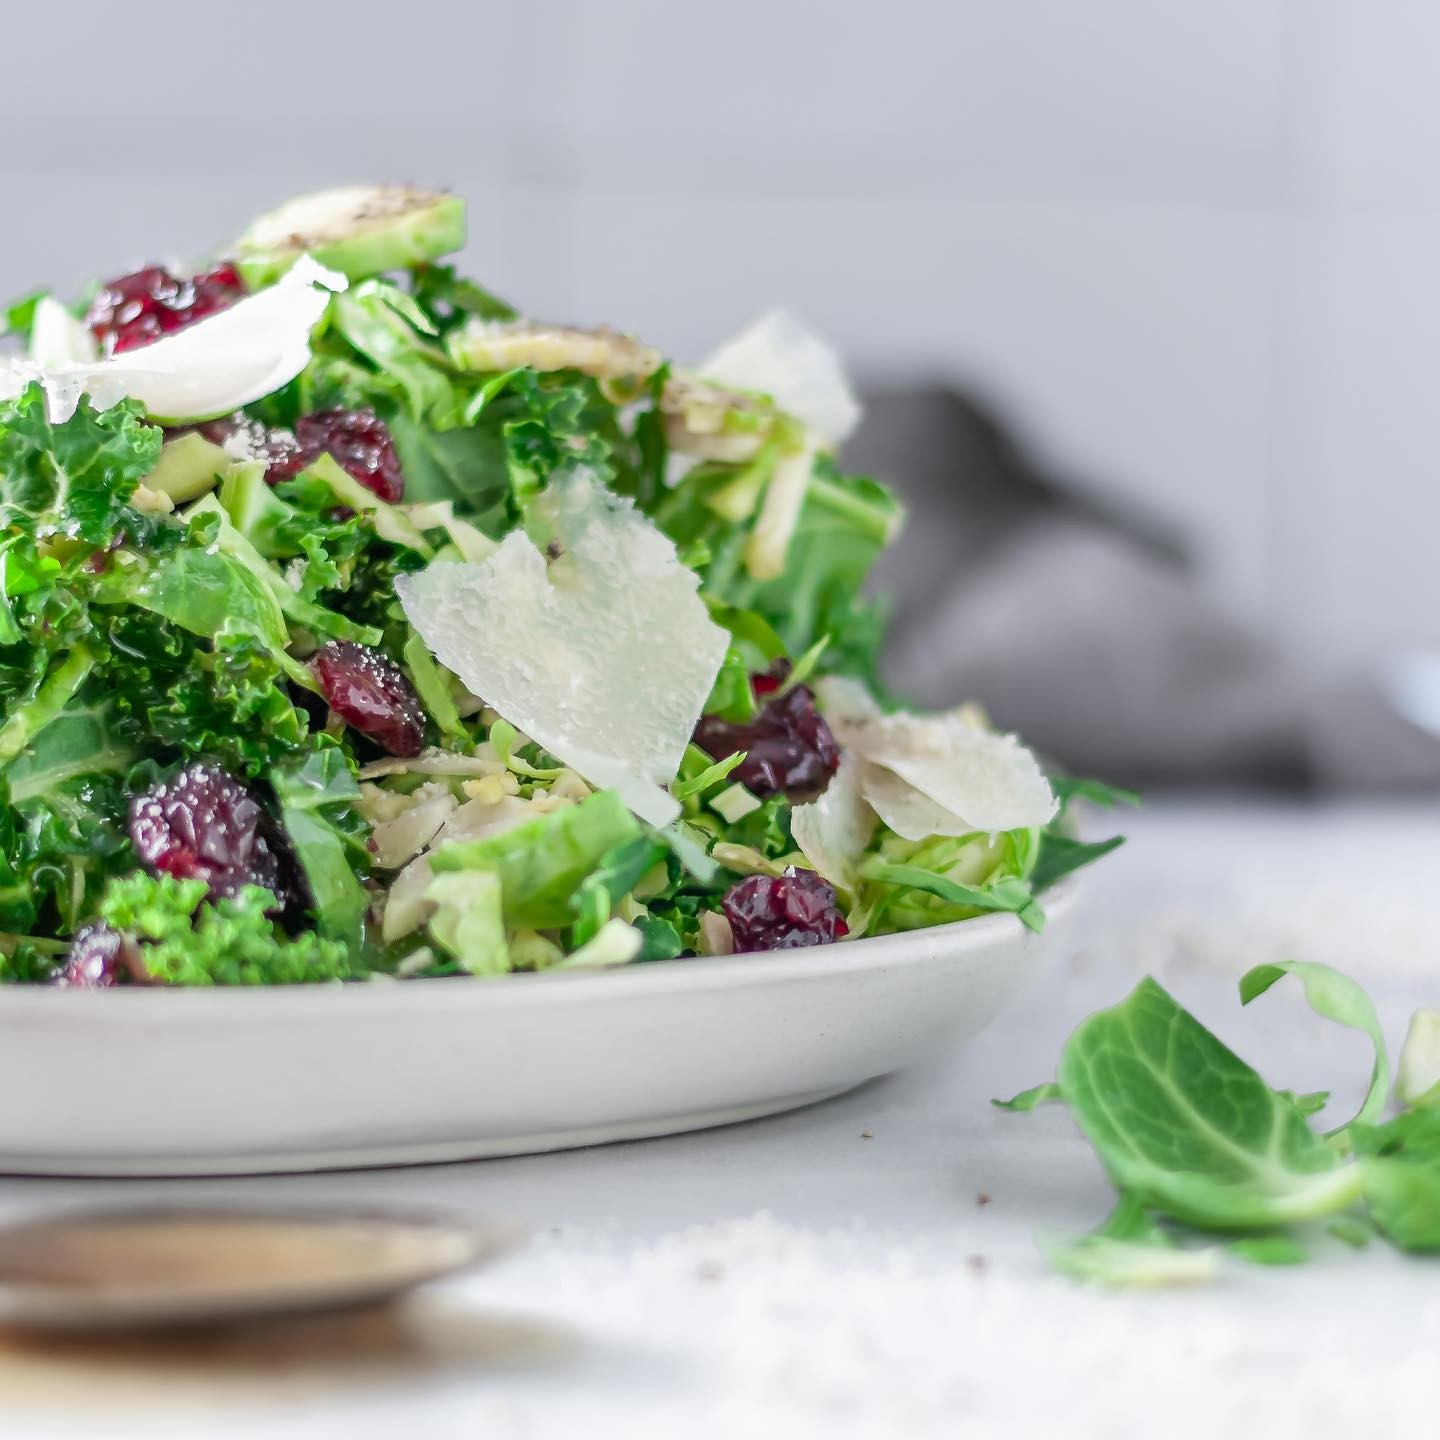 This kale and shaved brussels sprout salad is light, gorgeous and healthy AF. With a a lightly sweet and vinegary maple Dijon dressing, dried cherries and shaved pecorino Romano (or parm) cheese this nutrient dense raw salad I’d just what your January detox needs. Get the recipe and some of my personal thoughts (not that you give a shit lol) on an attainable and sustainable healthy switch post-holiday. 
.
.
.
#kalesalad #glutenfreerecipes #saladrecipe #mycommontable #tastingtable #cameraeatsfirst #foodblogfeed #eatprettythings #food4thought #foodwinewomen #inmykitchen  #chicagofoodbloggers #foodfluffer #tastesogood #eattherainbow #makeitdelicious #hellasalads #yummygoodness #foodphotooftheday #foodtographyschool #eatyourveggies #brusselsprouts #huffposttaste #f52grams #shareyourtable #beckwalshcrew #recipesthatreallywork #brightfoodies